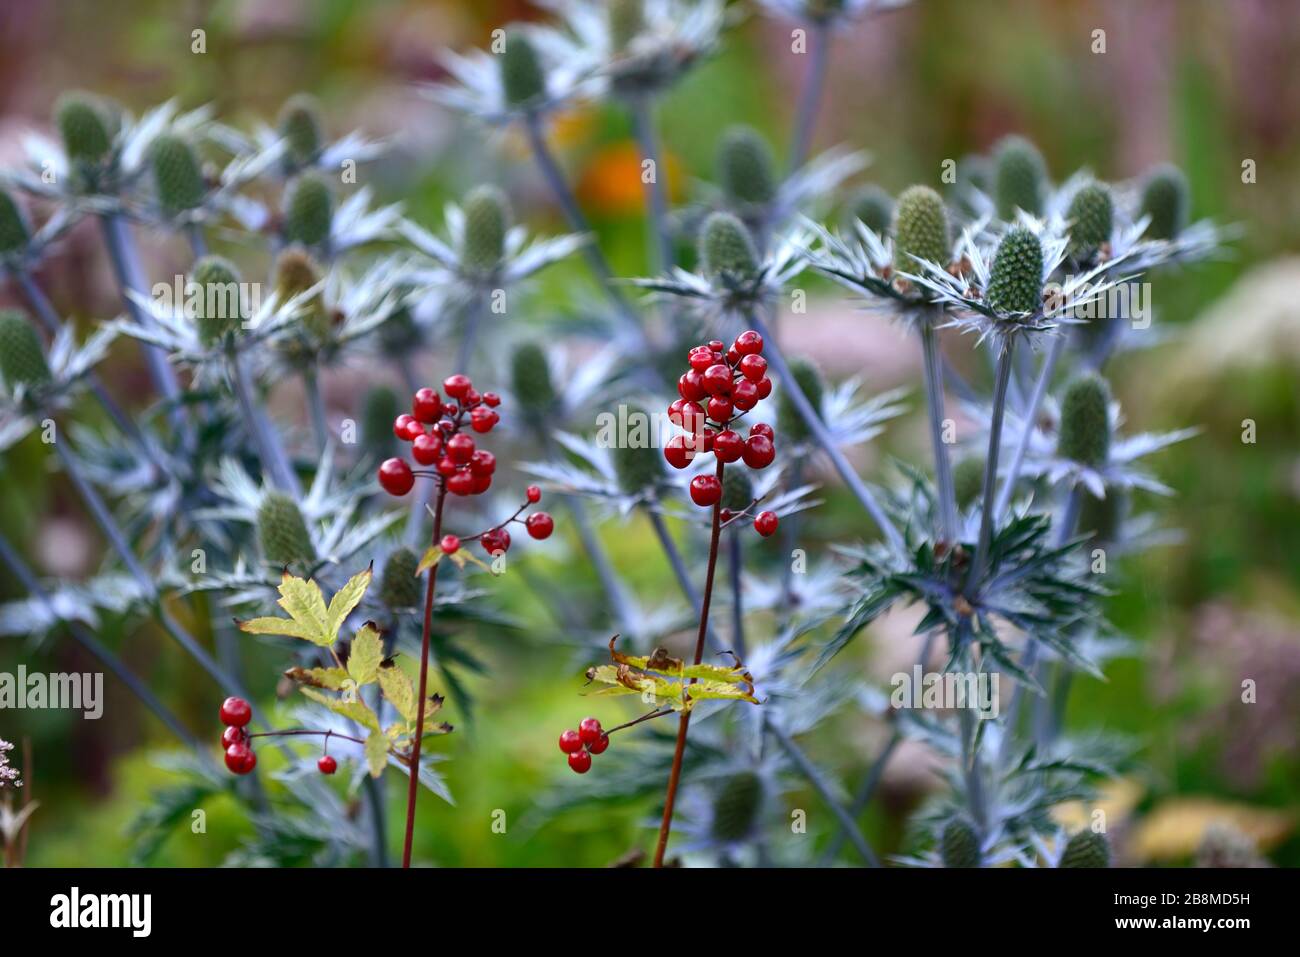 red berries,Actaea rubra,red baneberry,chinaberry,blue thistle,blue sea holly,flower,flowers,flowering,bract,bracts,garden,gardens,red and blue garden Stock Photo